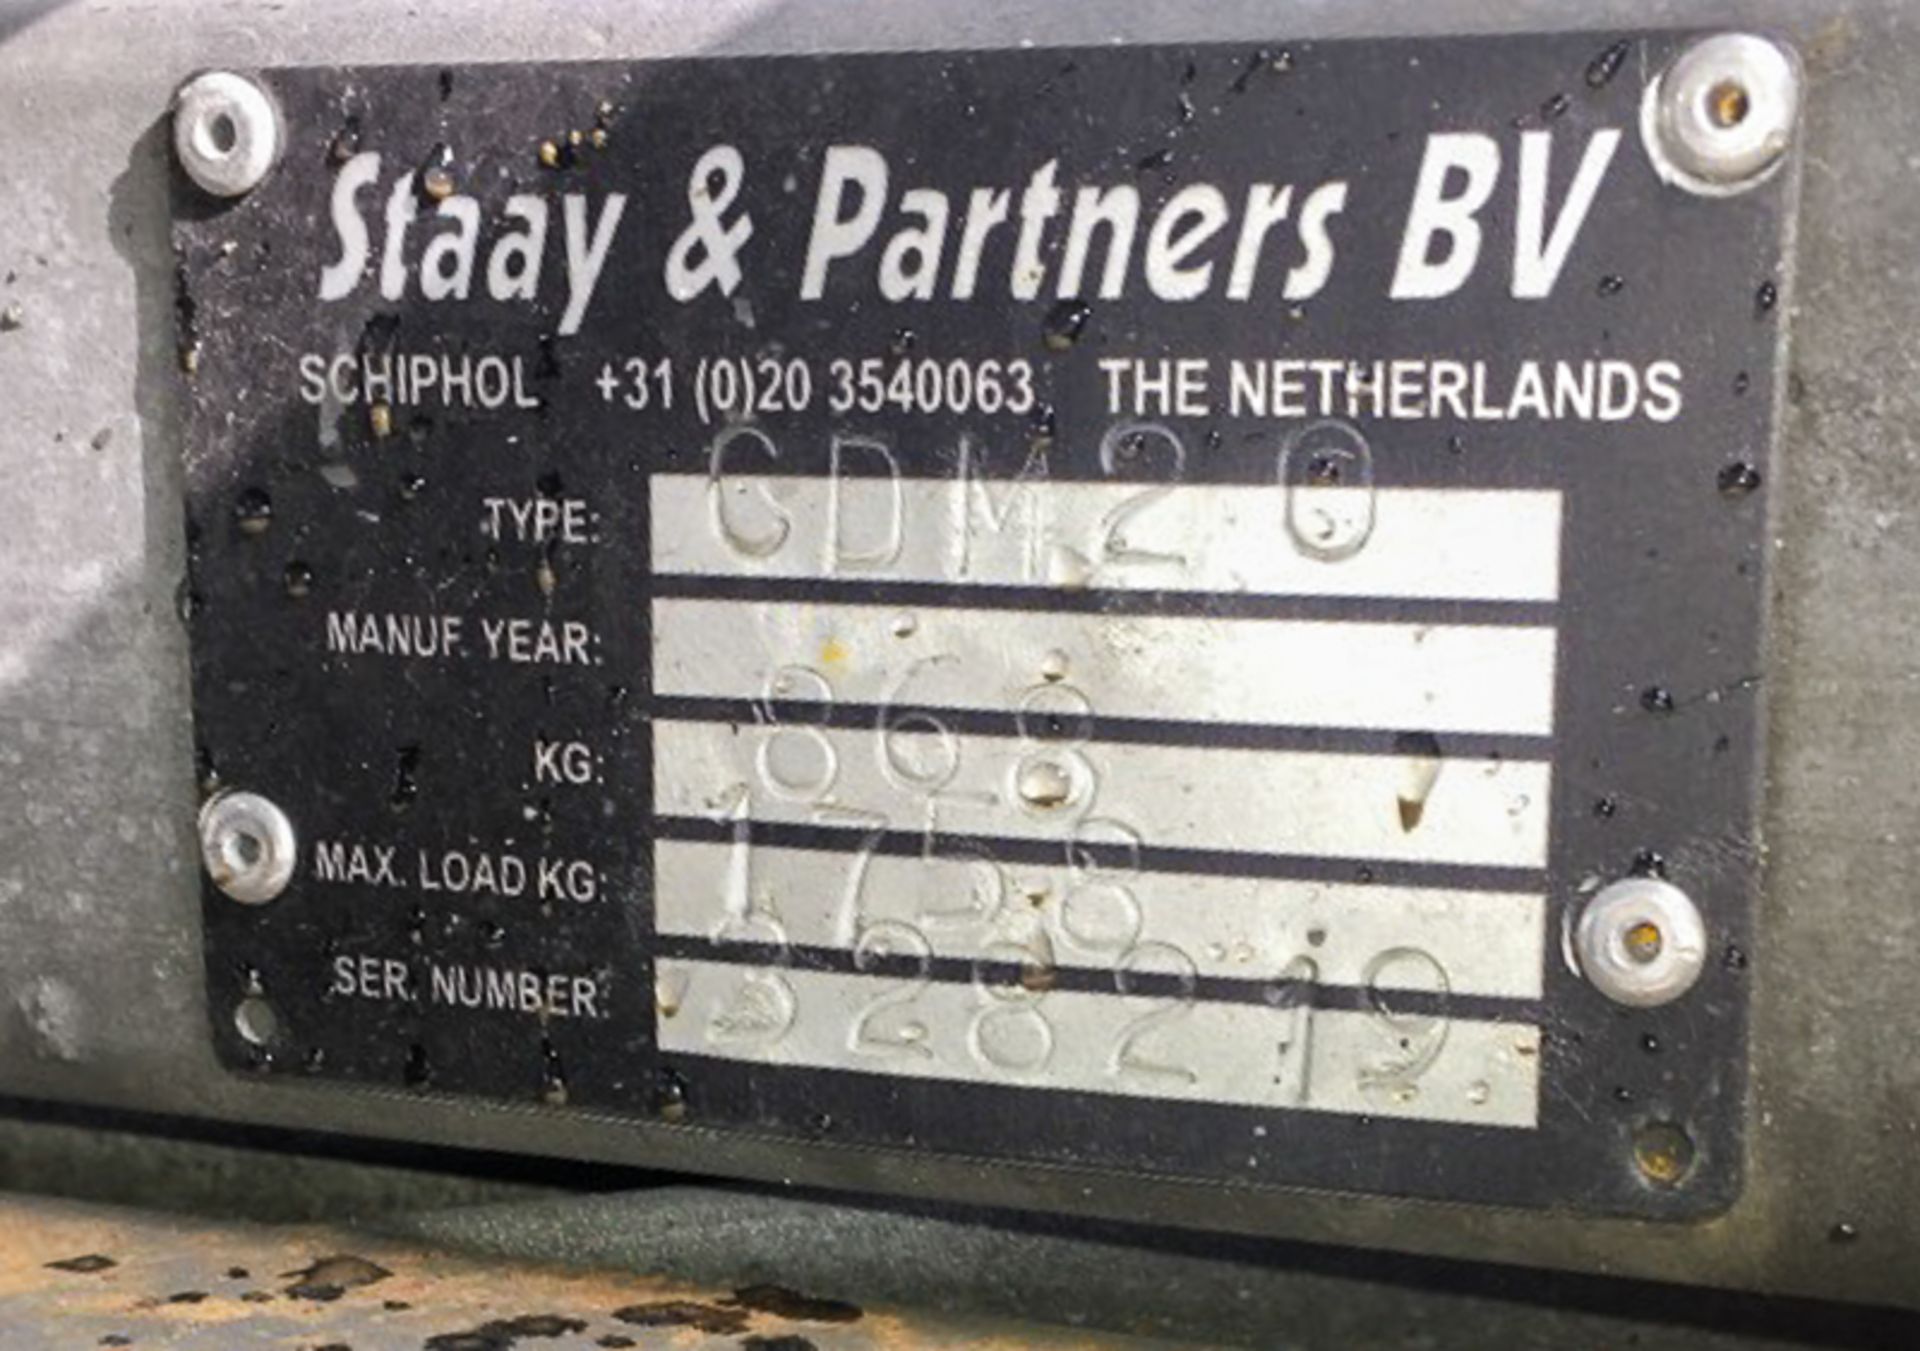 Pair of Staay & Partners (S-P-S BV) CDM 20 ULD Trailers - Image 4 of 5